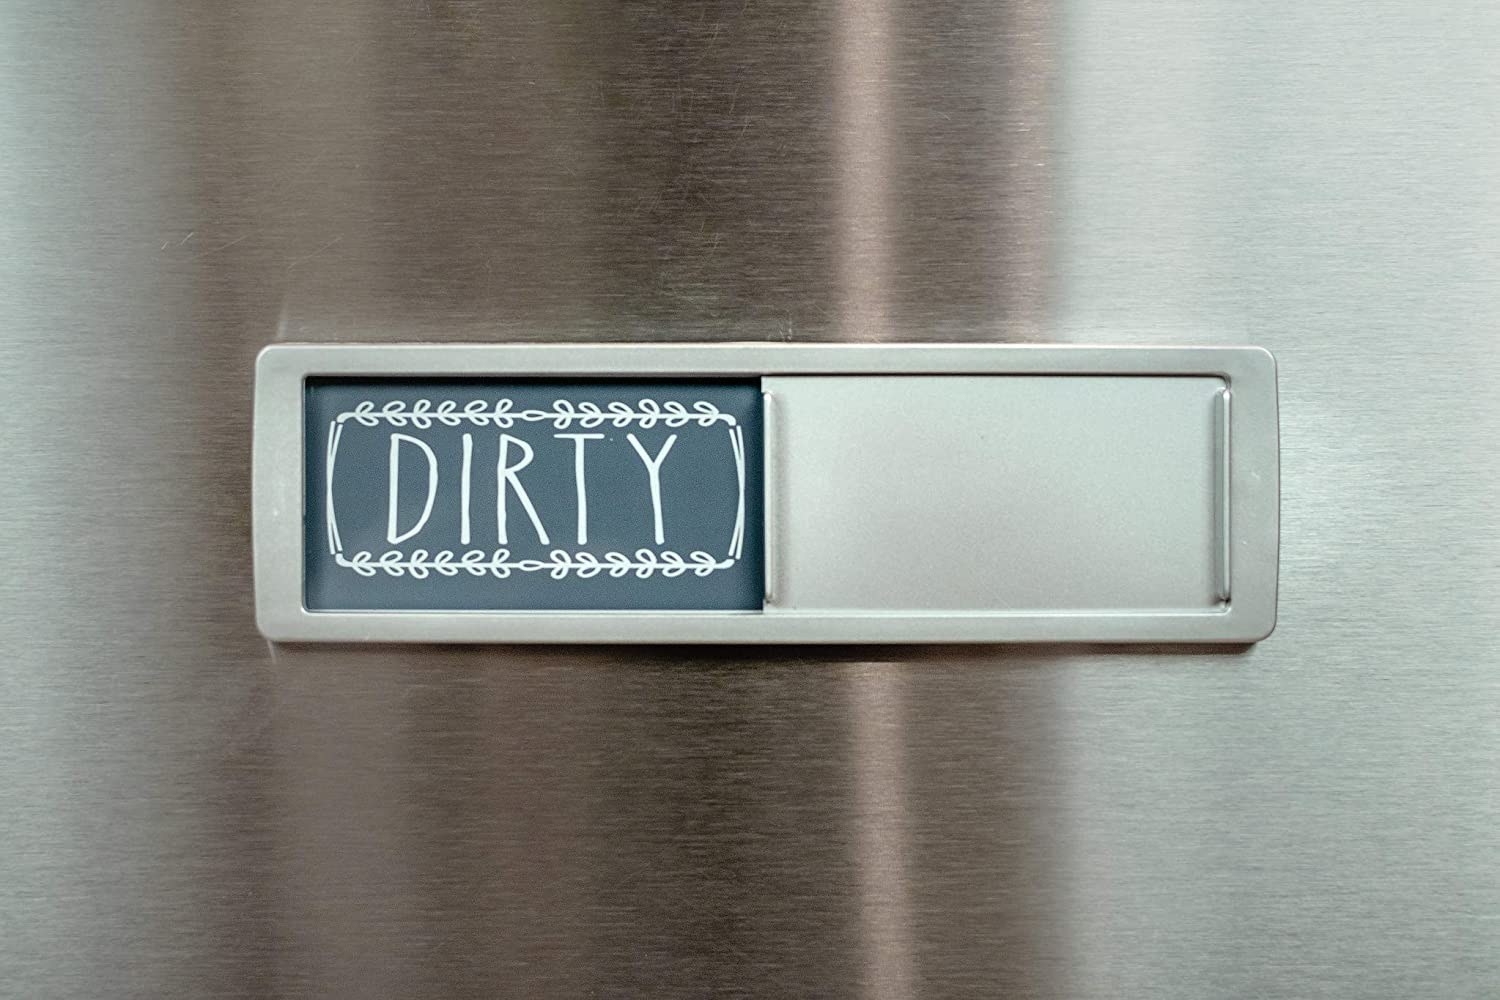 The slidable magnet on a dishwasher set to dirty